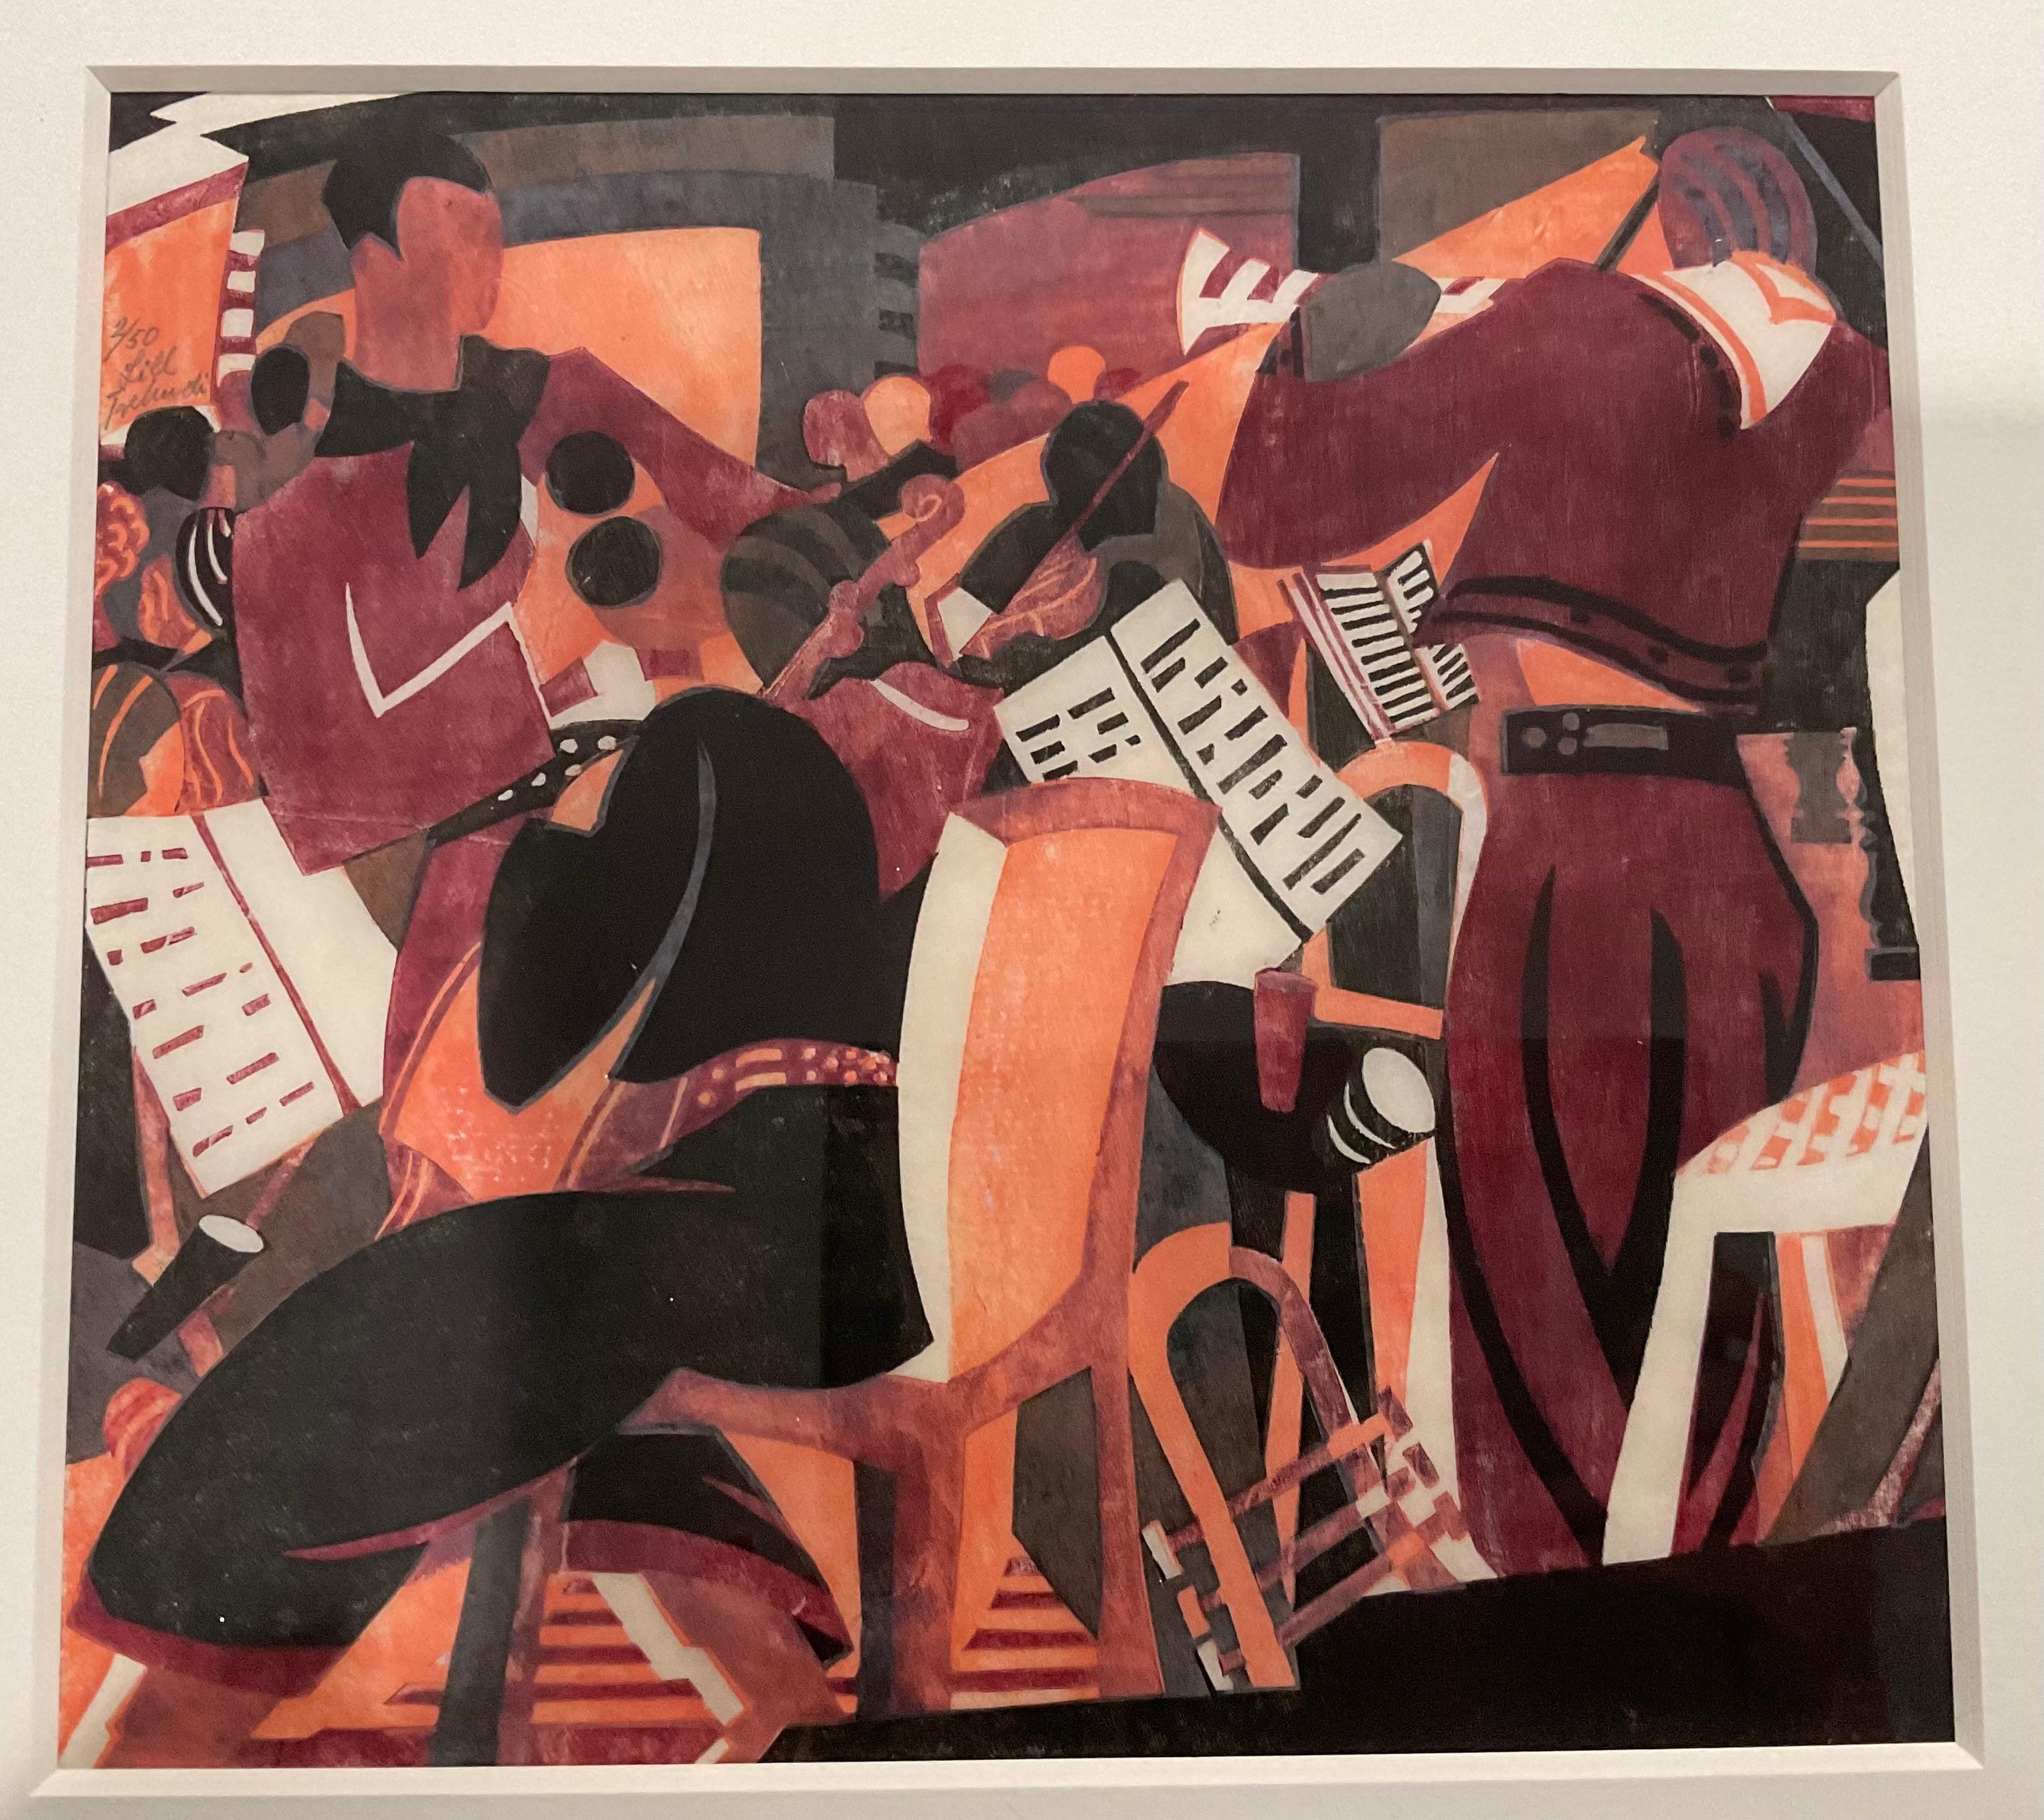 Lill Tschudi (1911-2004) Rhumba I Lino Cut Signed and Numbered 2 of 50. Includes copies of original gallery paperwork from Mary Ryan Gallery New York, NY And original receipt from 1990. 